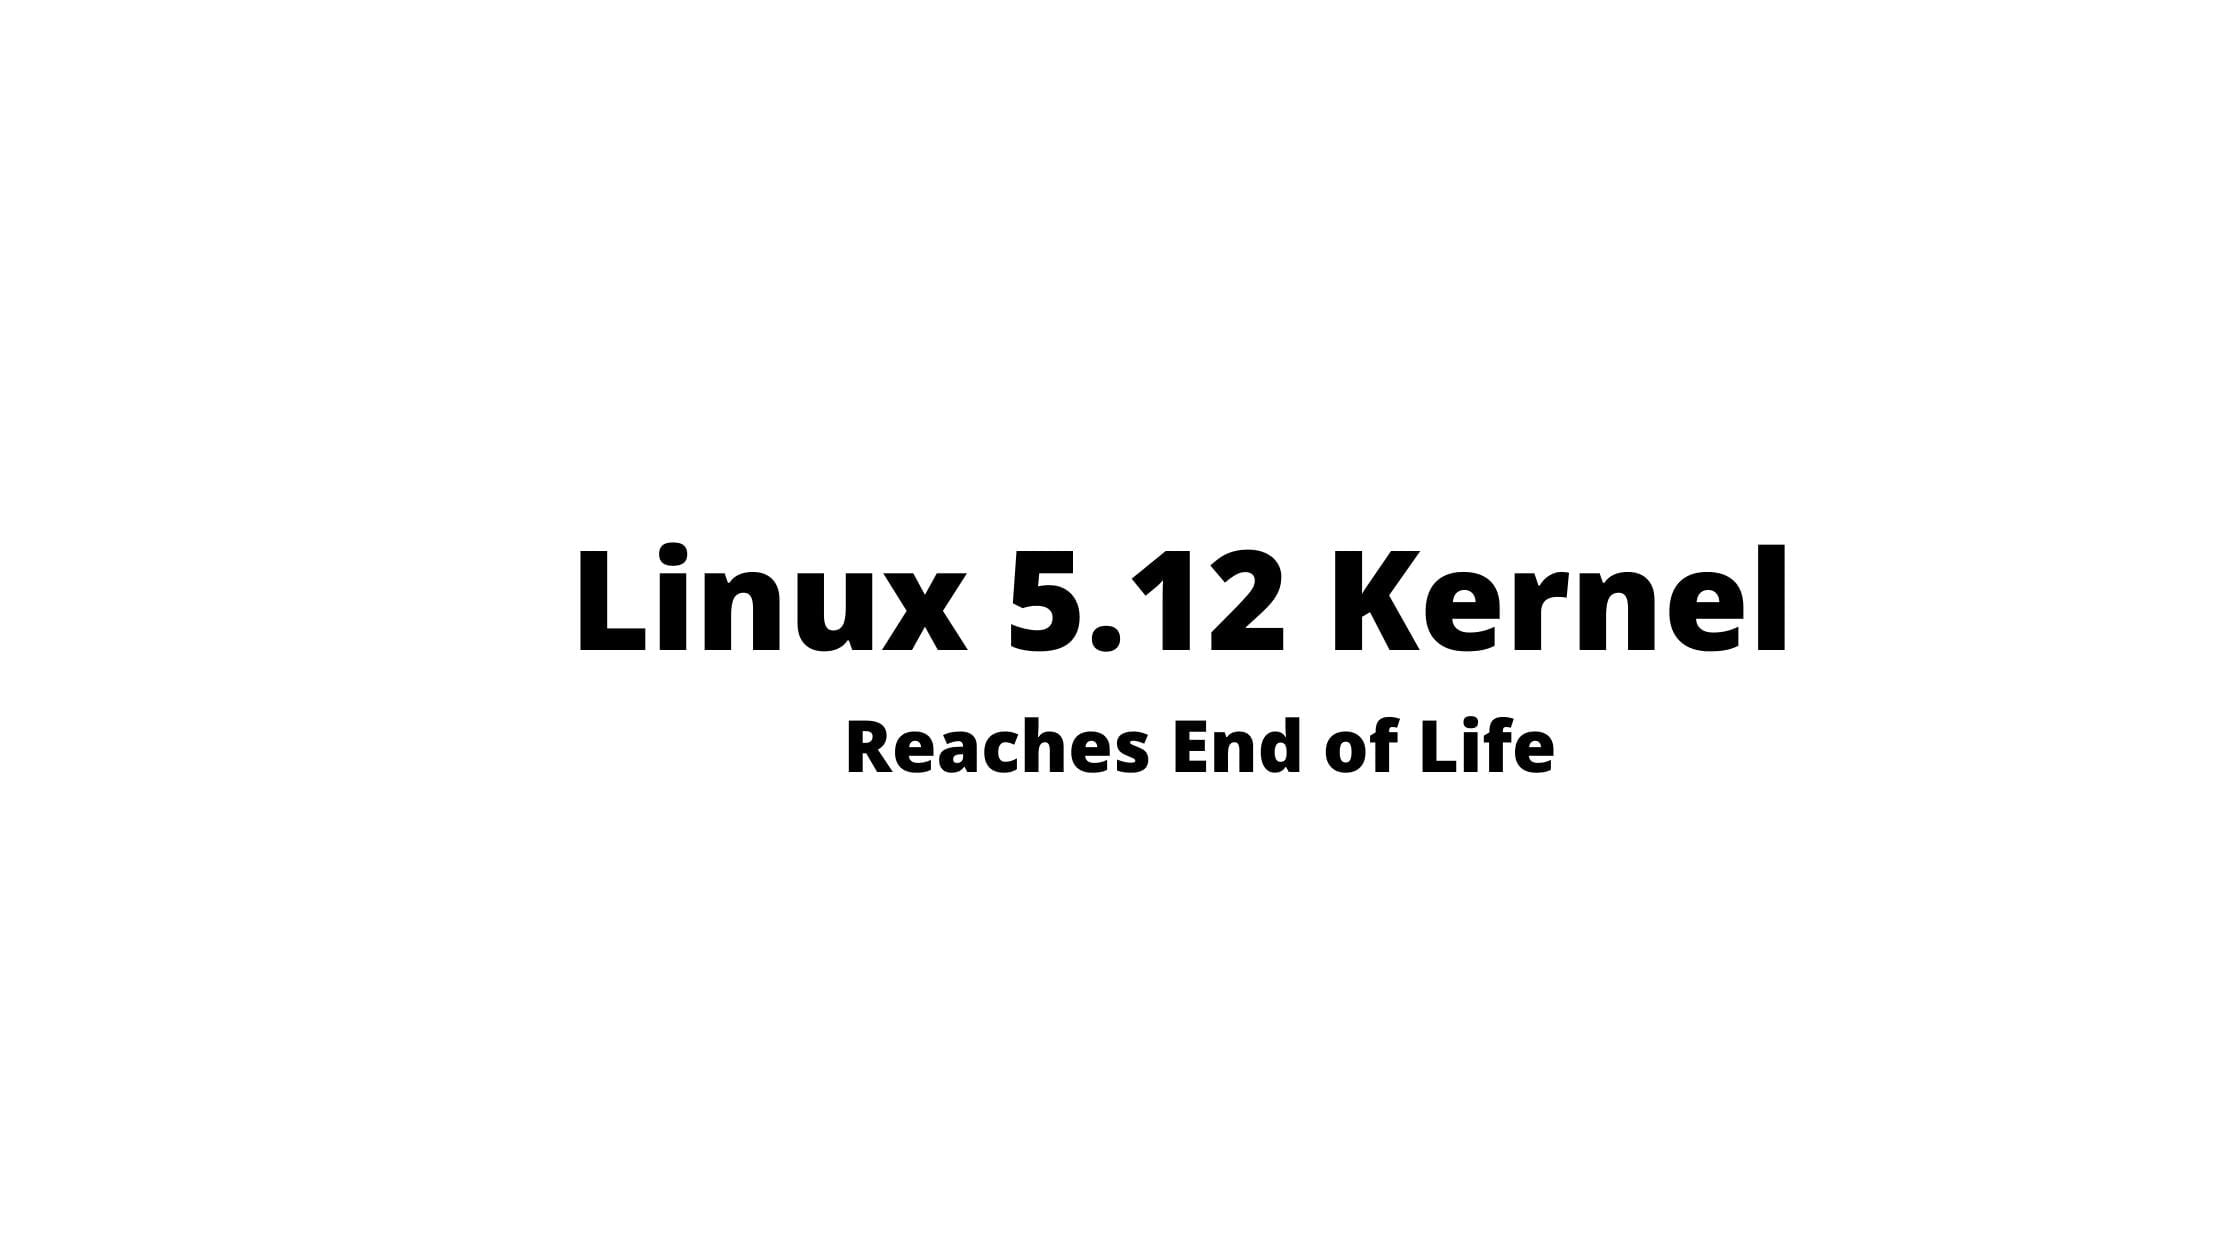 Linux 5.12 Kernel Reaches End of Life